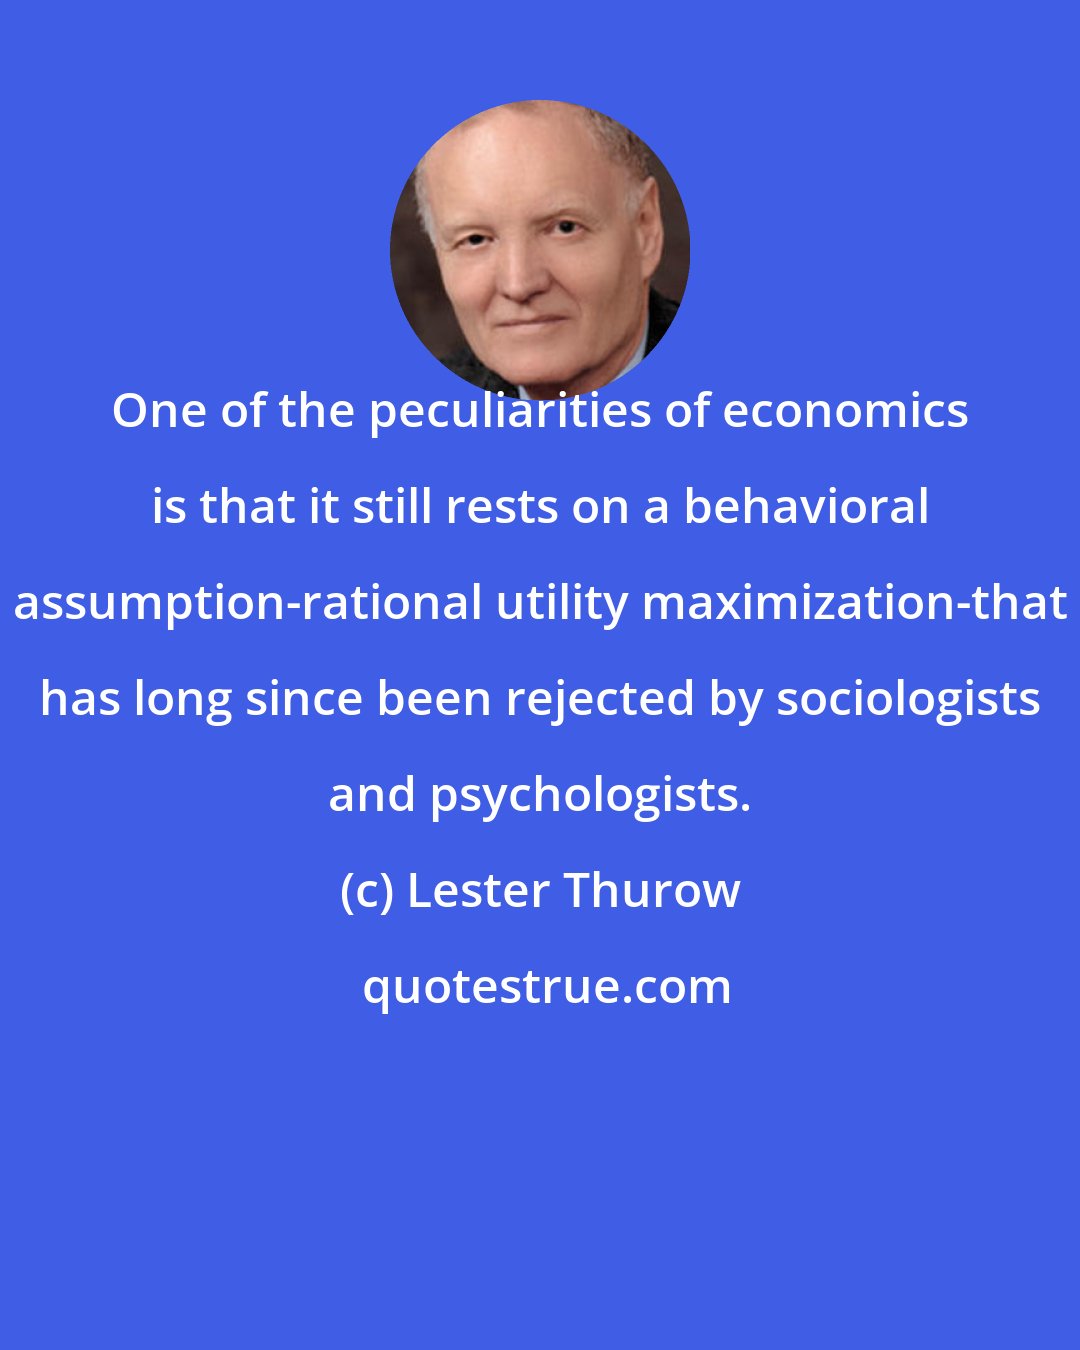 Lester Thurow: One of the peculiarities of economics is that it still rests on a behavioral assumption-rational utility maximization-that has long since been rejected by sociologists and psychologists.